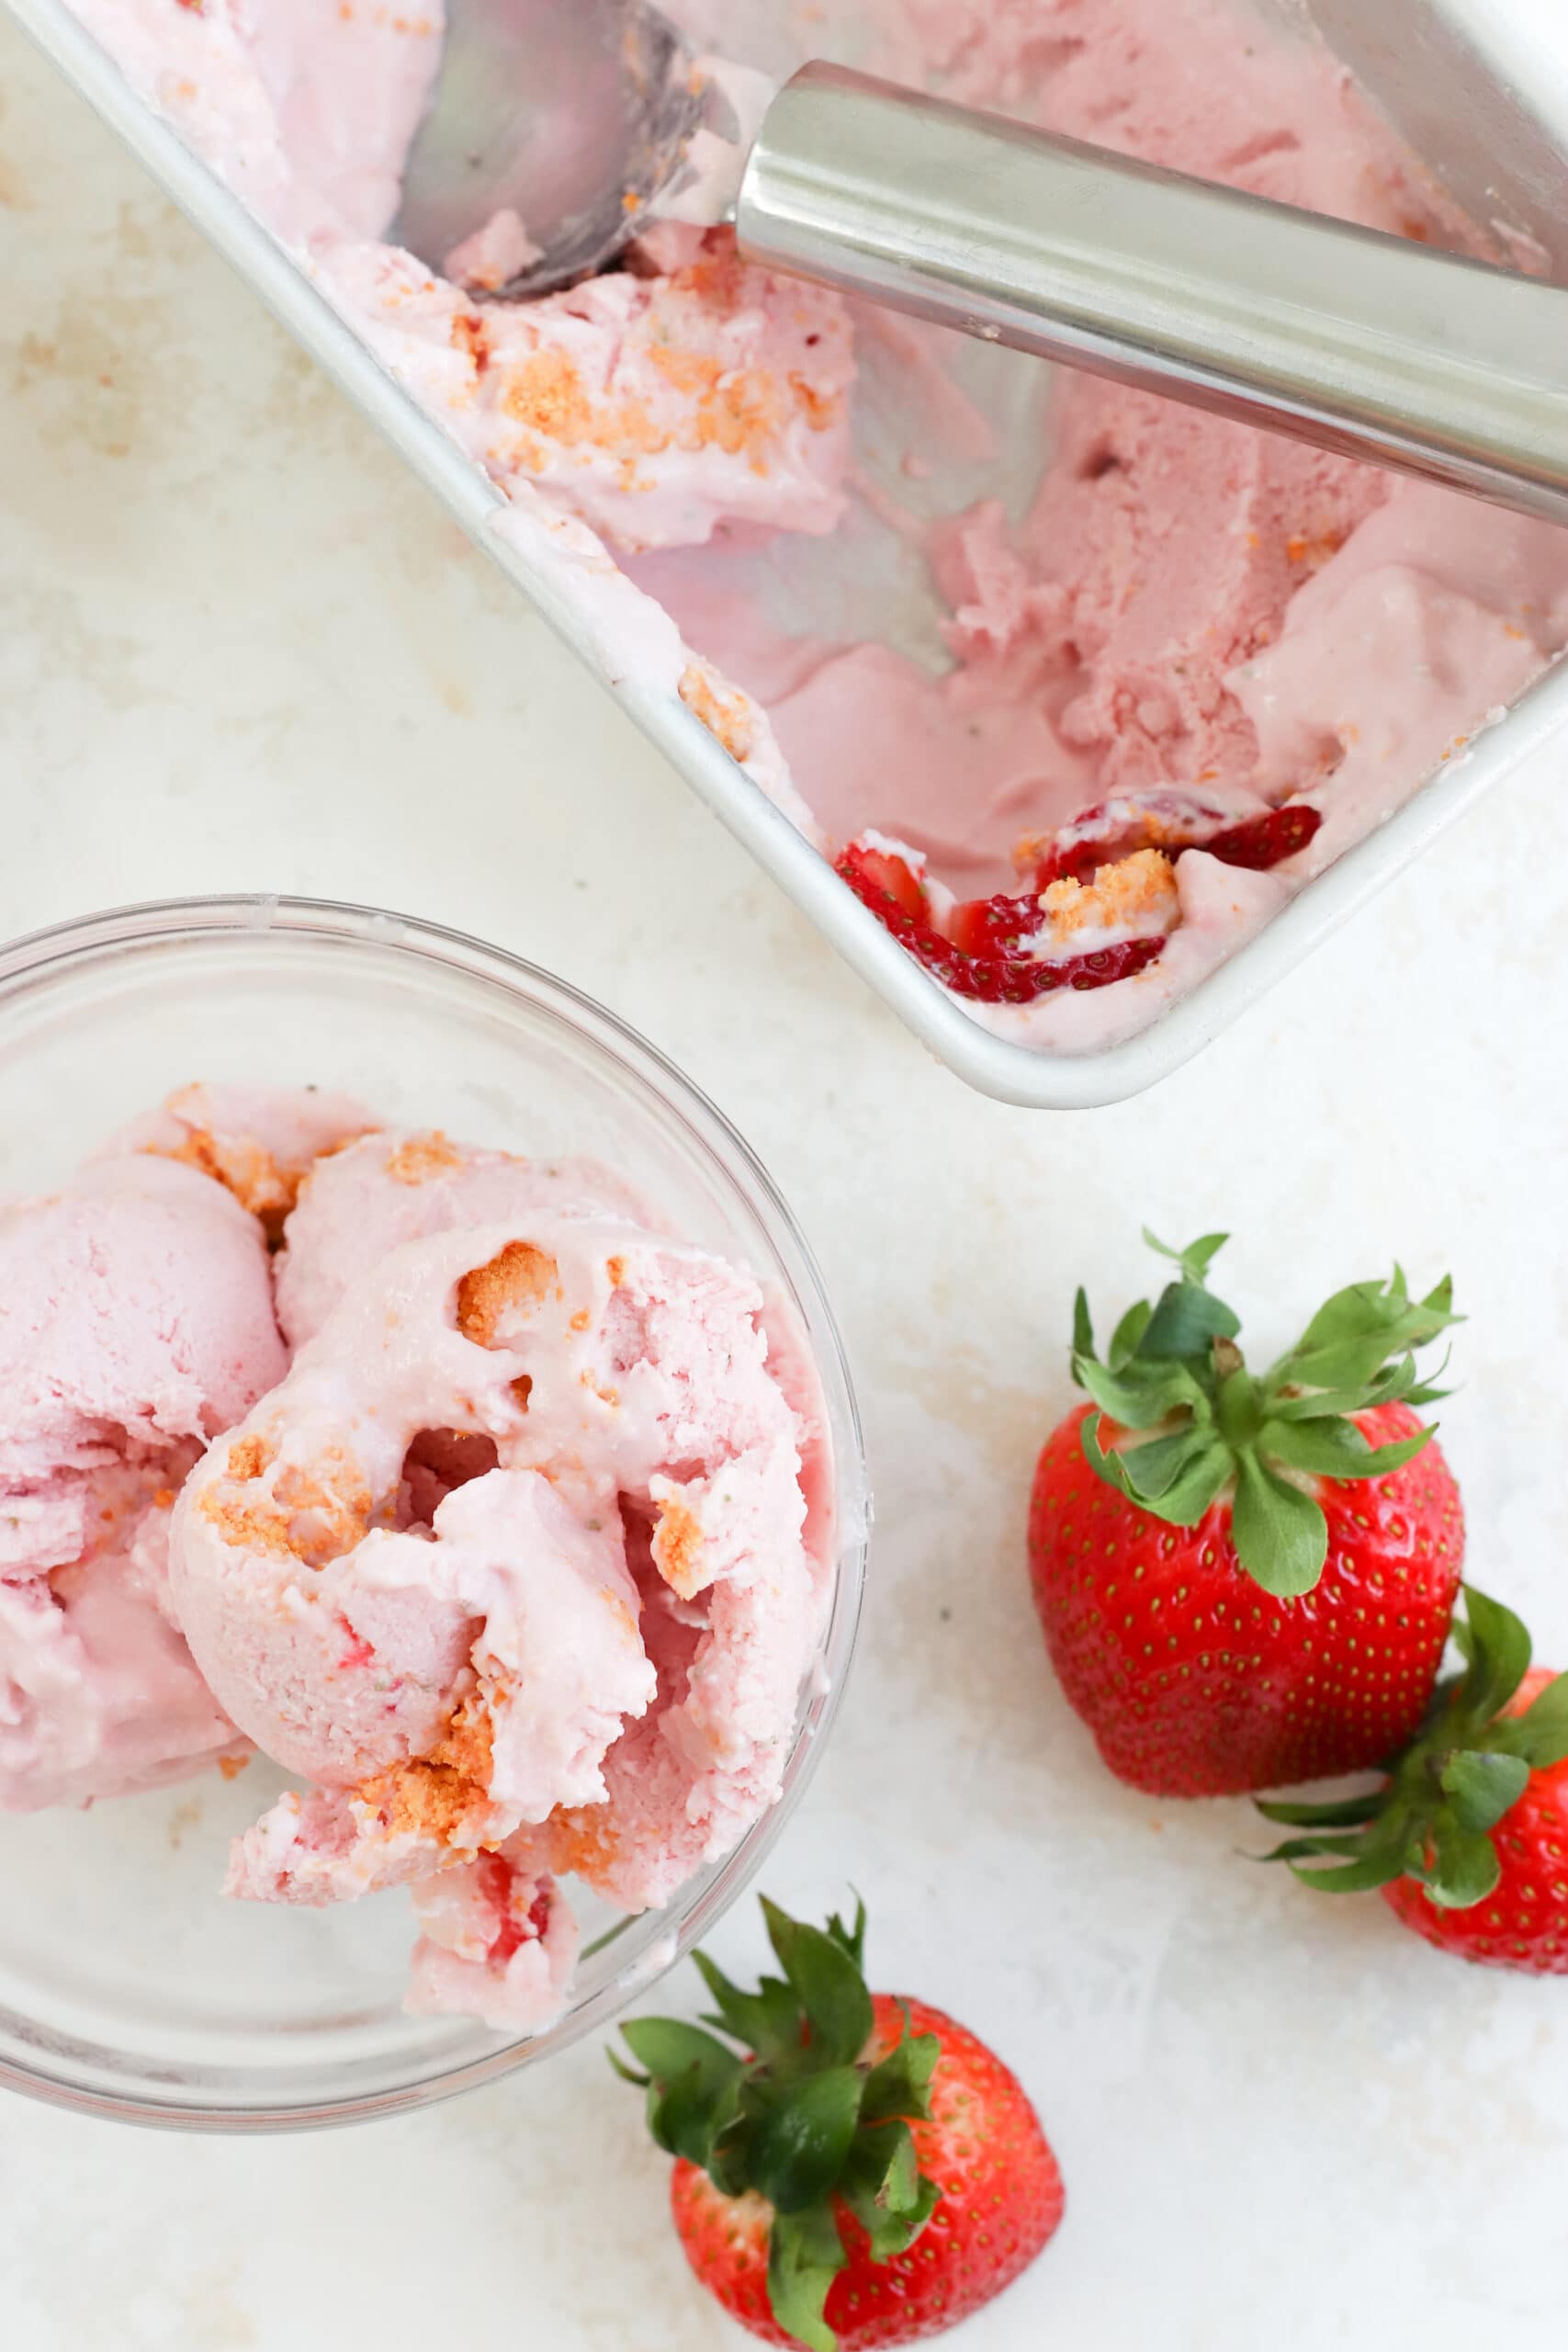 https://www.lindsaypleskot.com/wp-content/uploads/2023/05/High-Protein-Strawberry-Cottage-Cheese-Ice-Cream-4-scaled.jpg